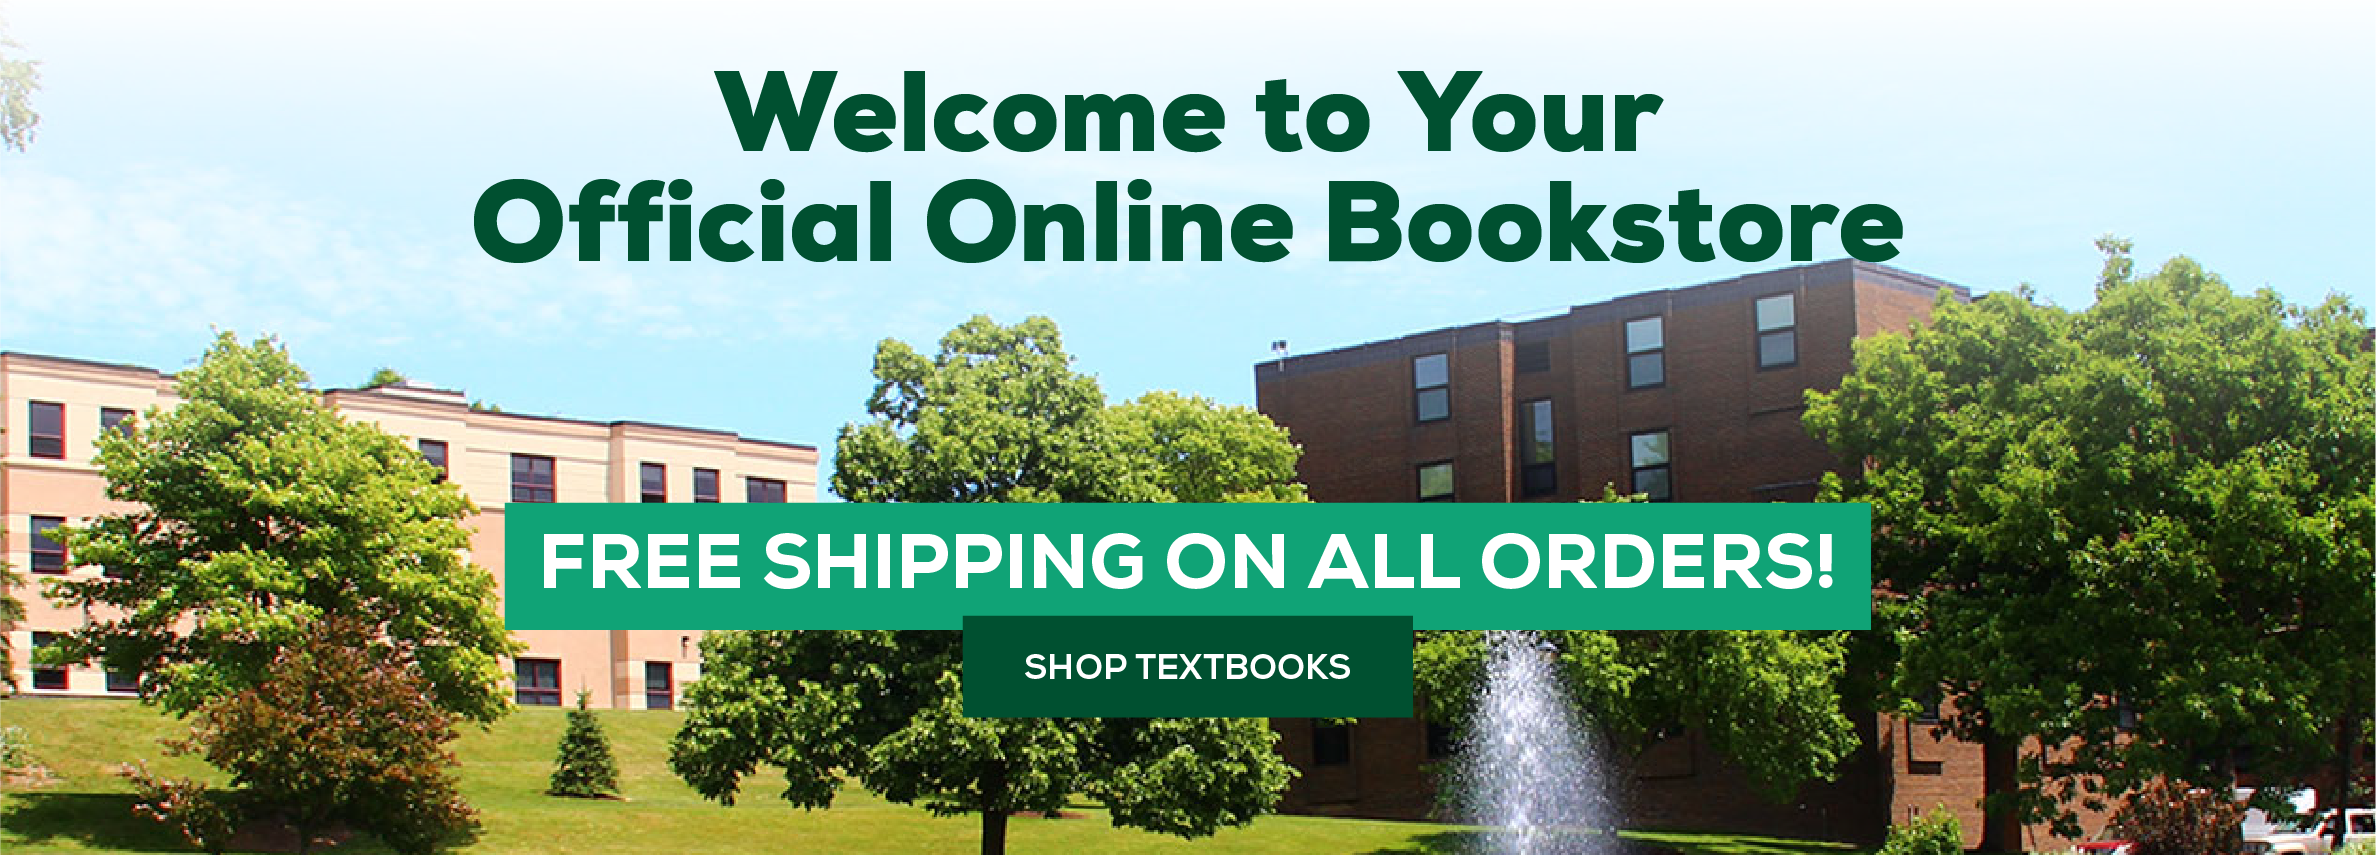 Welcome to your official online bookstore. Free shipping. Click to shop textbooks. (new tab)